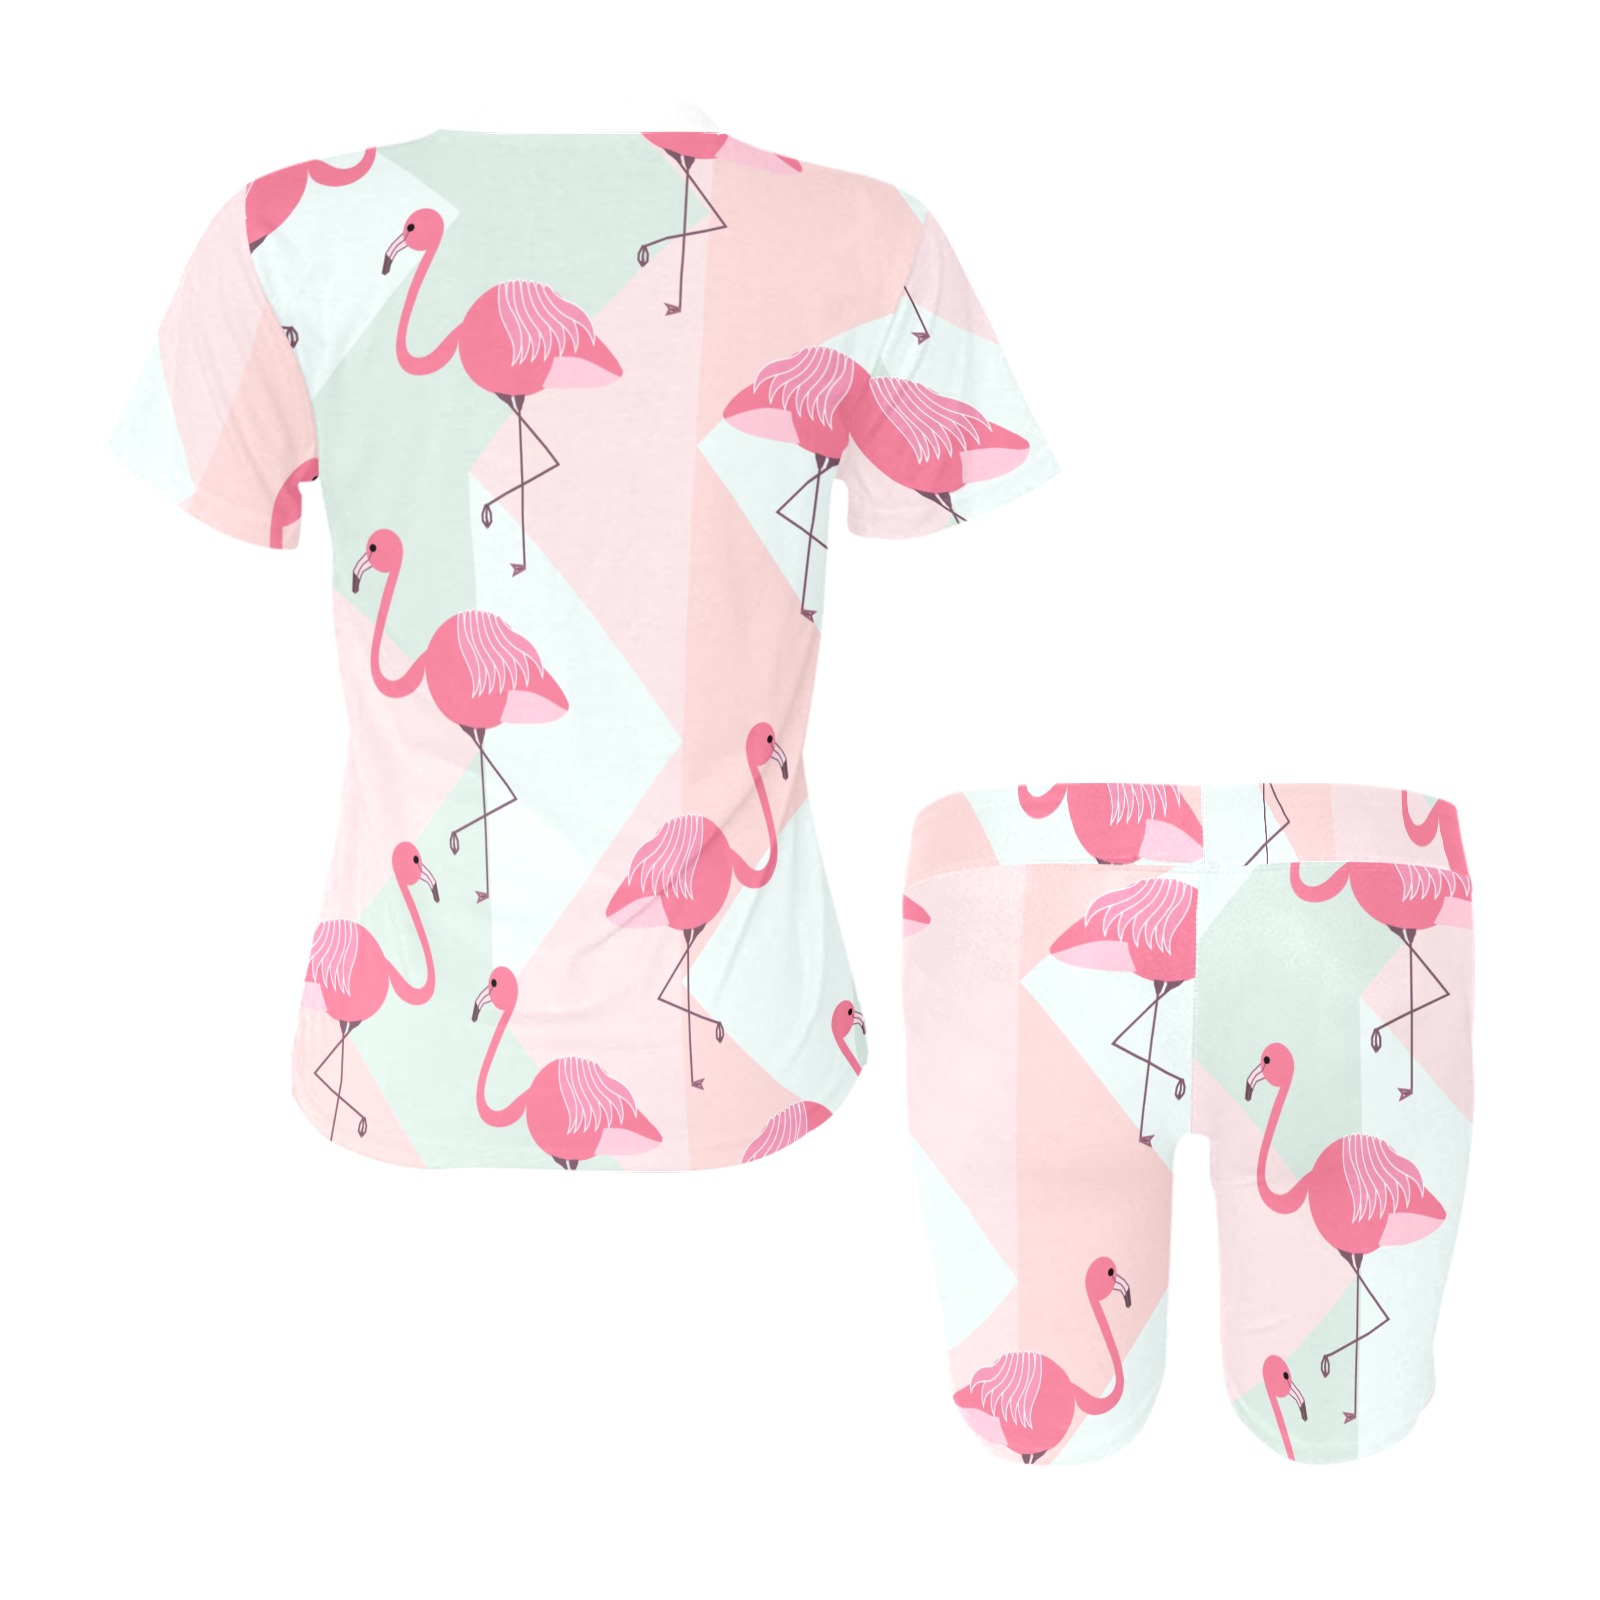 Abstract,vintage summer pattern with pink flamingos.jpg Women's Short Yoga Set